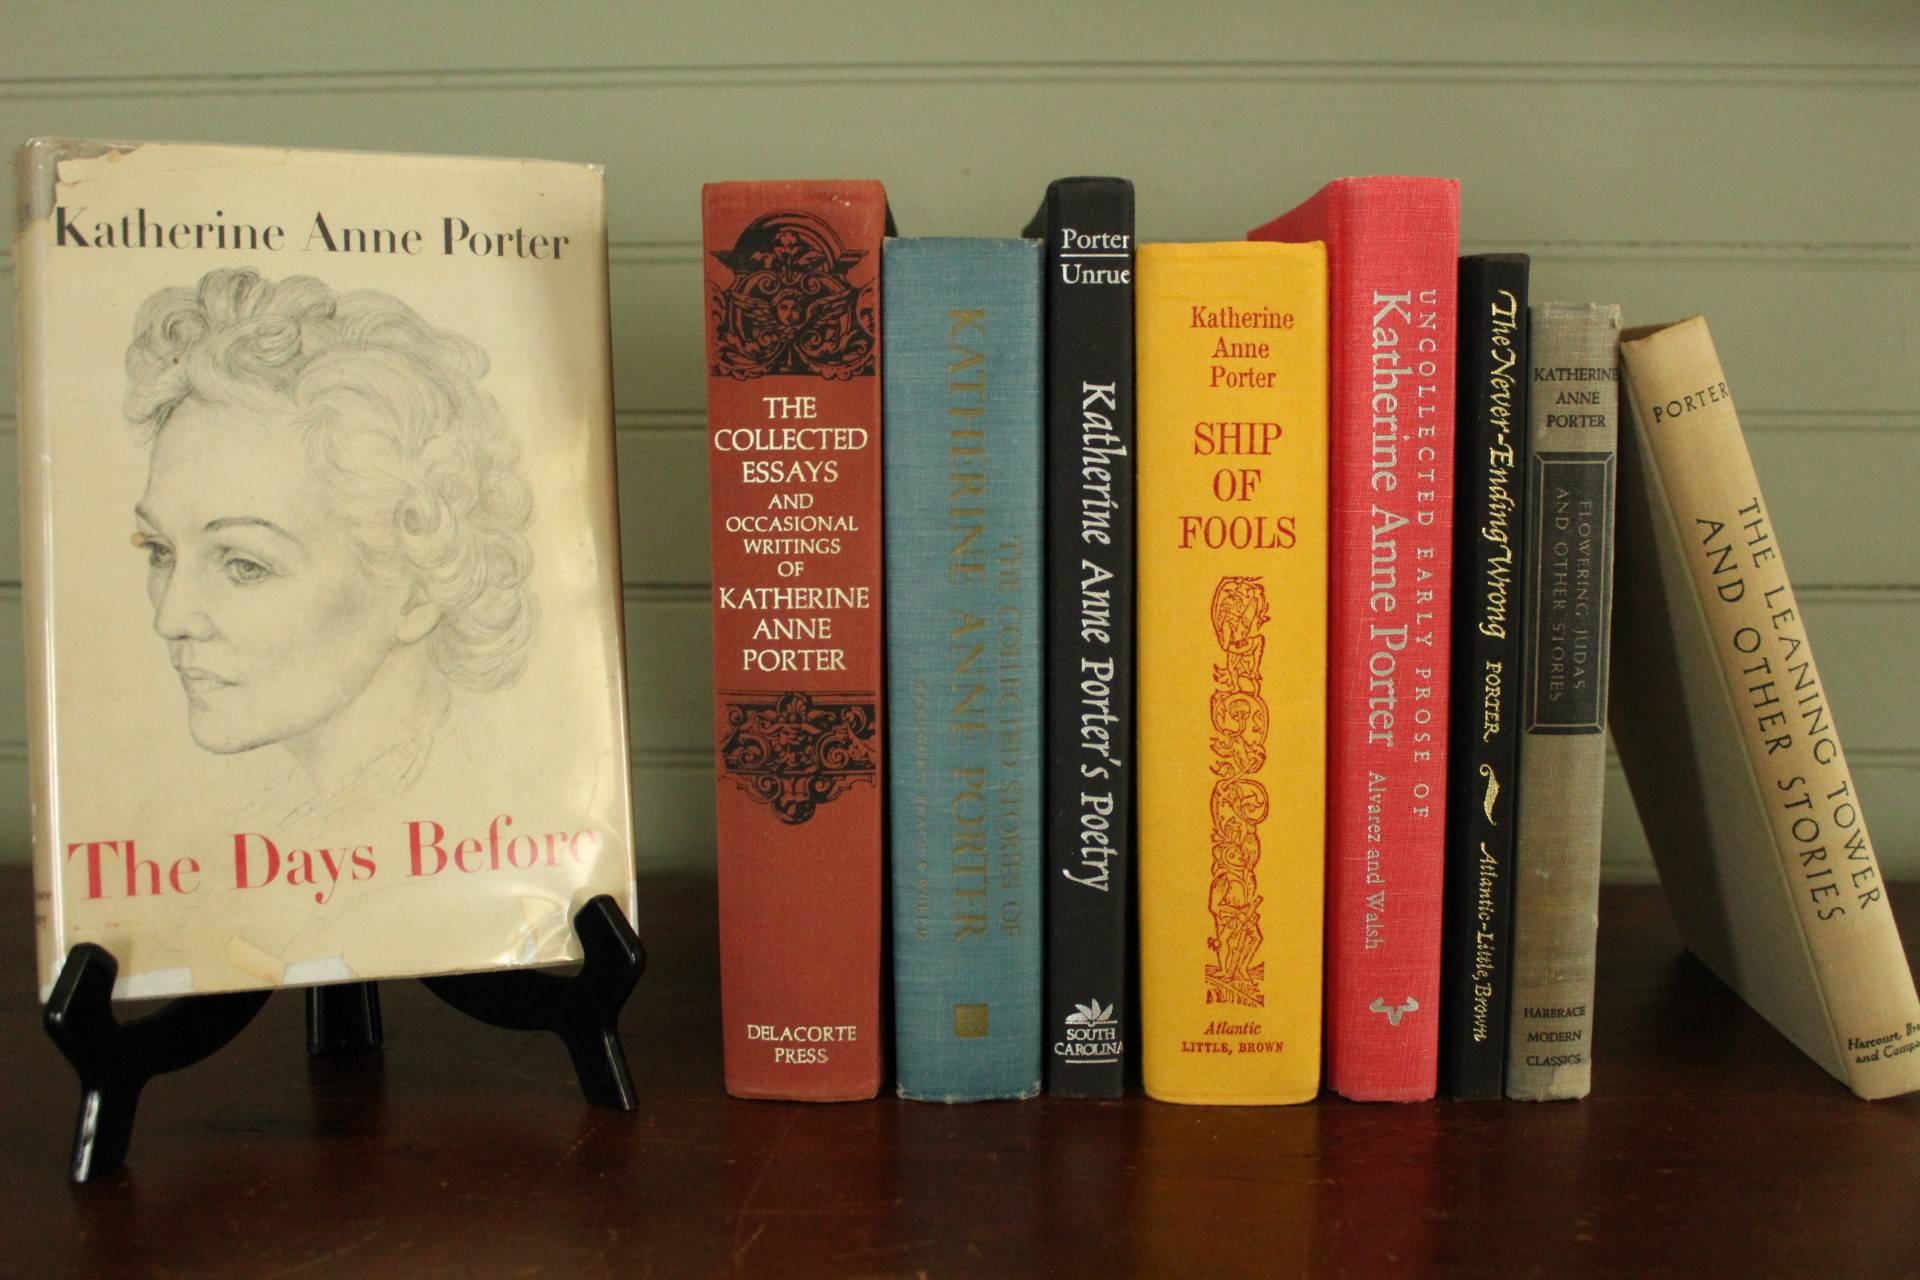 A collection of Katherine Anne Porter books on a shelf